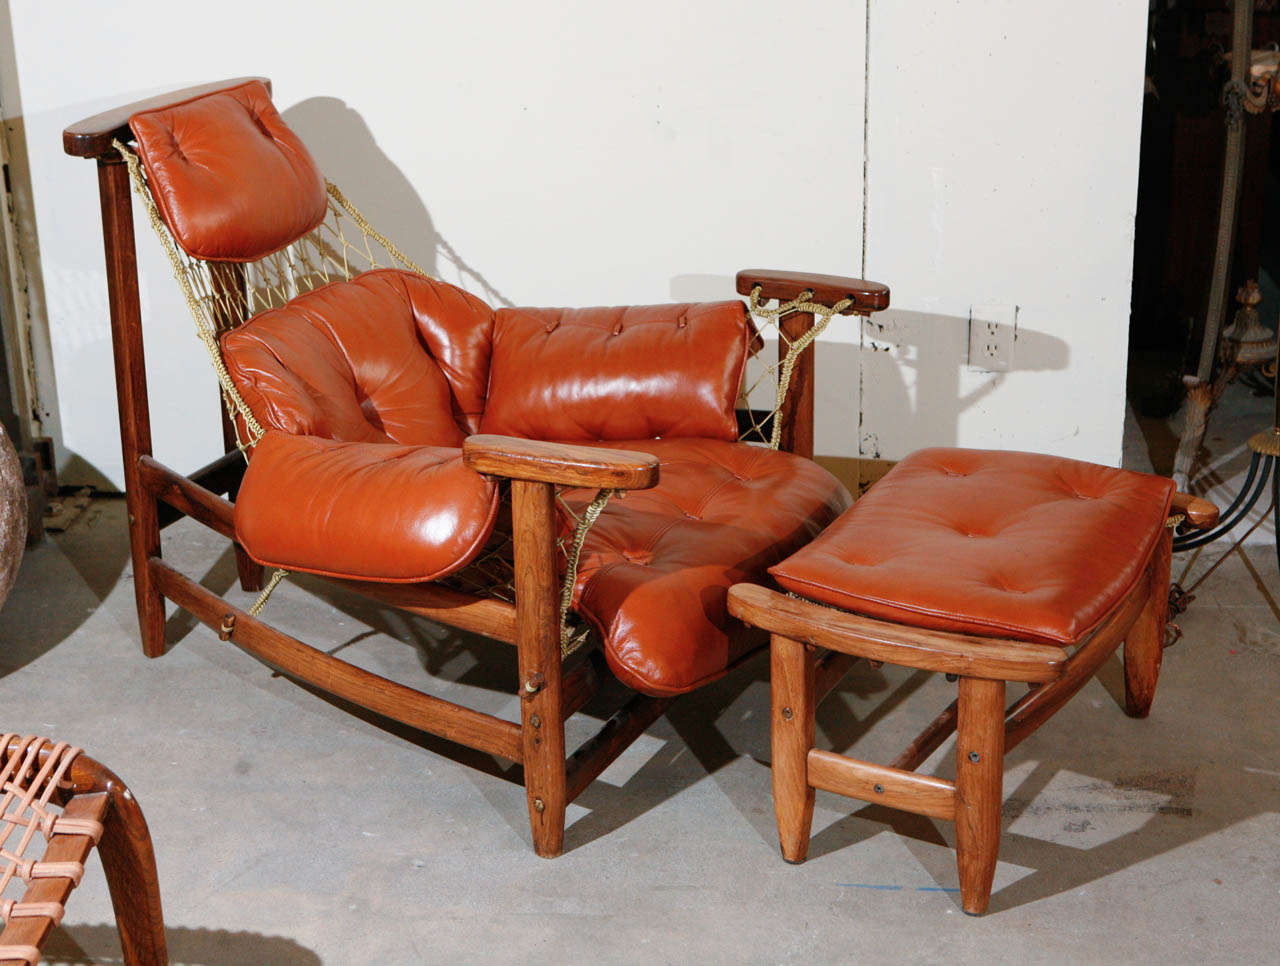 Jangarda Lounge chair and ottoman.
Designed by Jean Gillon for Woodart/Brezil circa 1970.
Exotic hardwood, leather and fishnet.